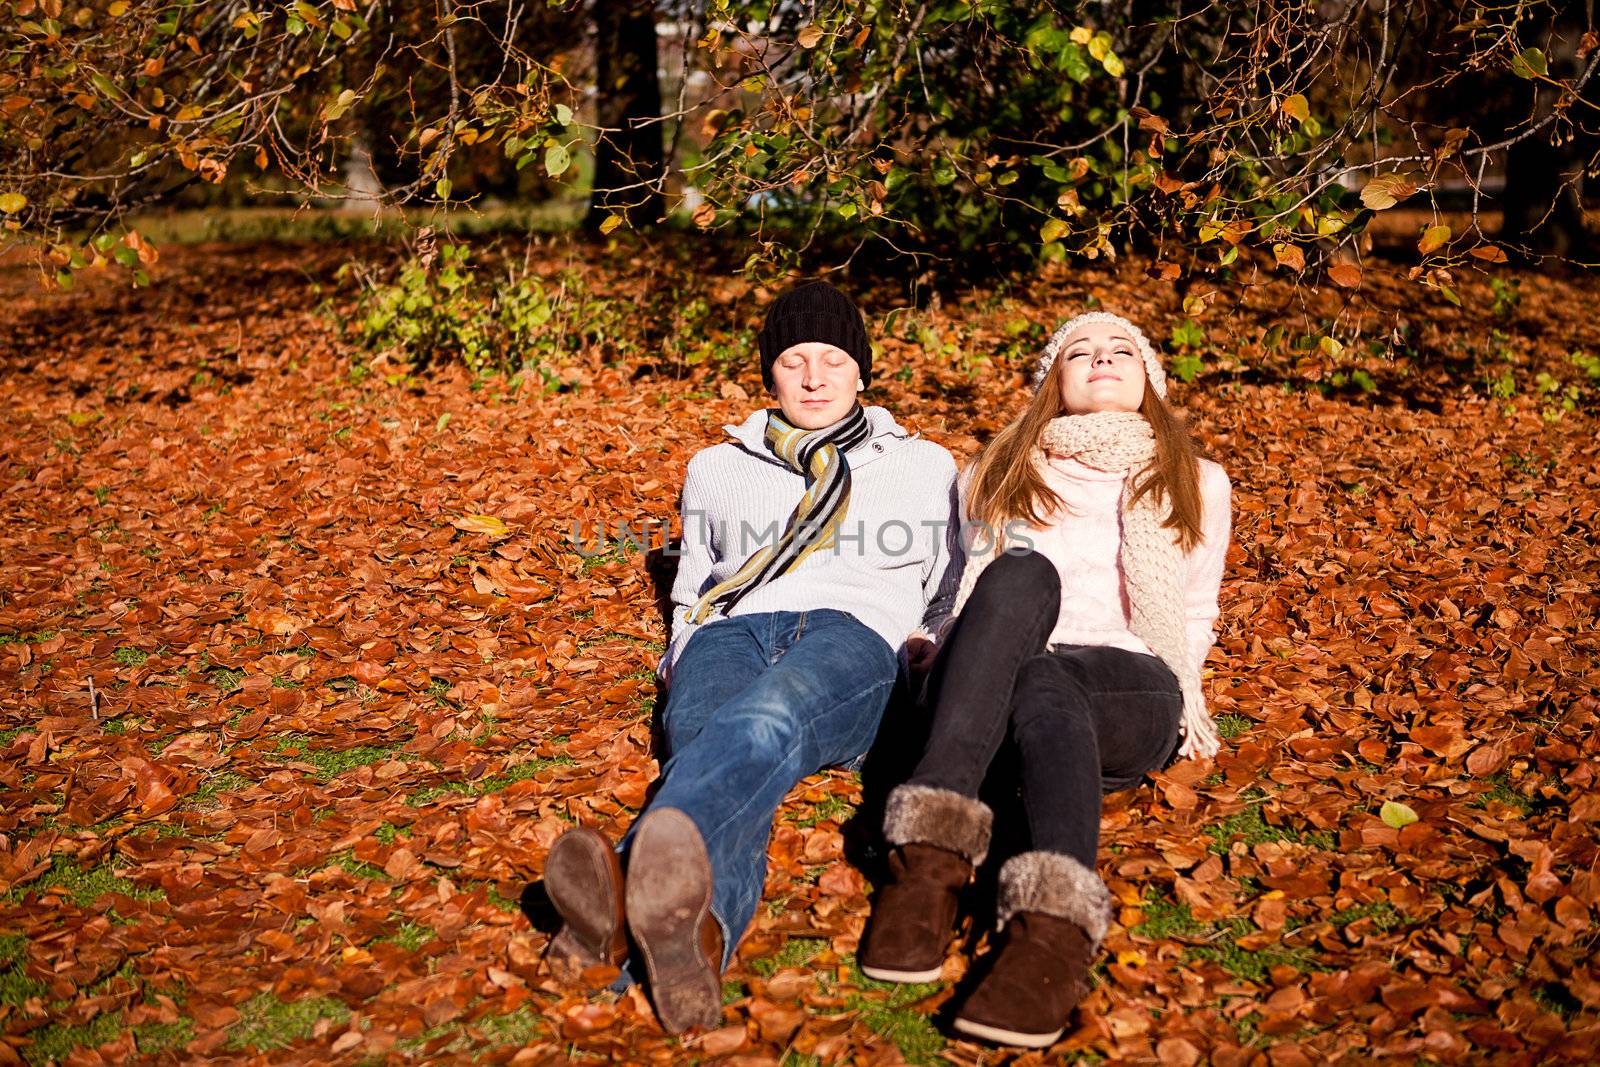 happy young couple smilin in colorful sunny autumn outdoor in park